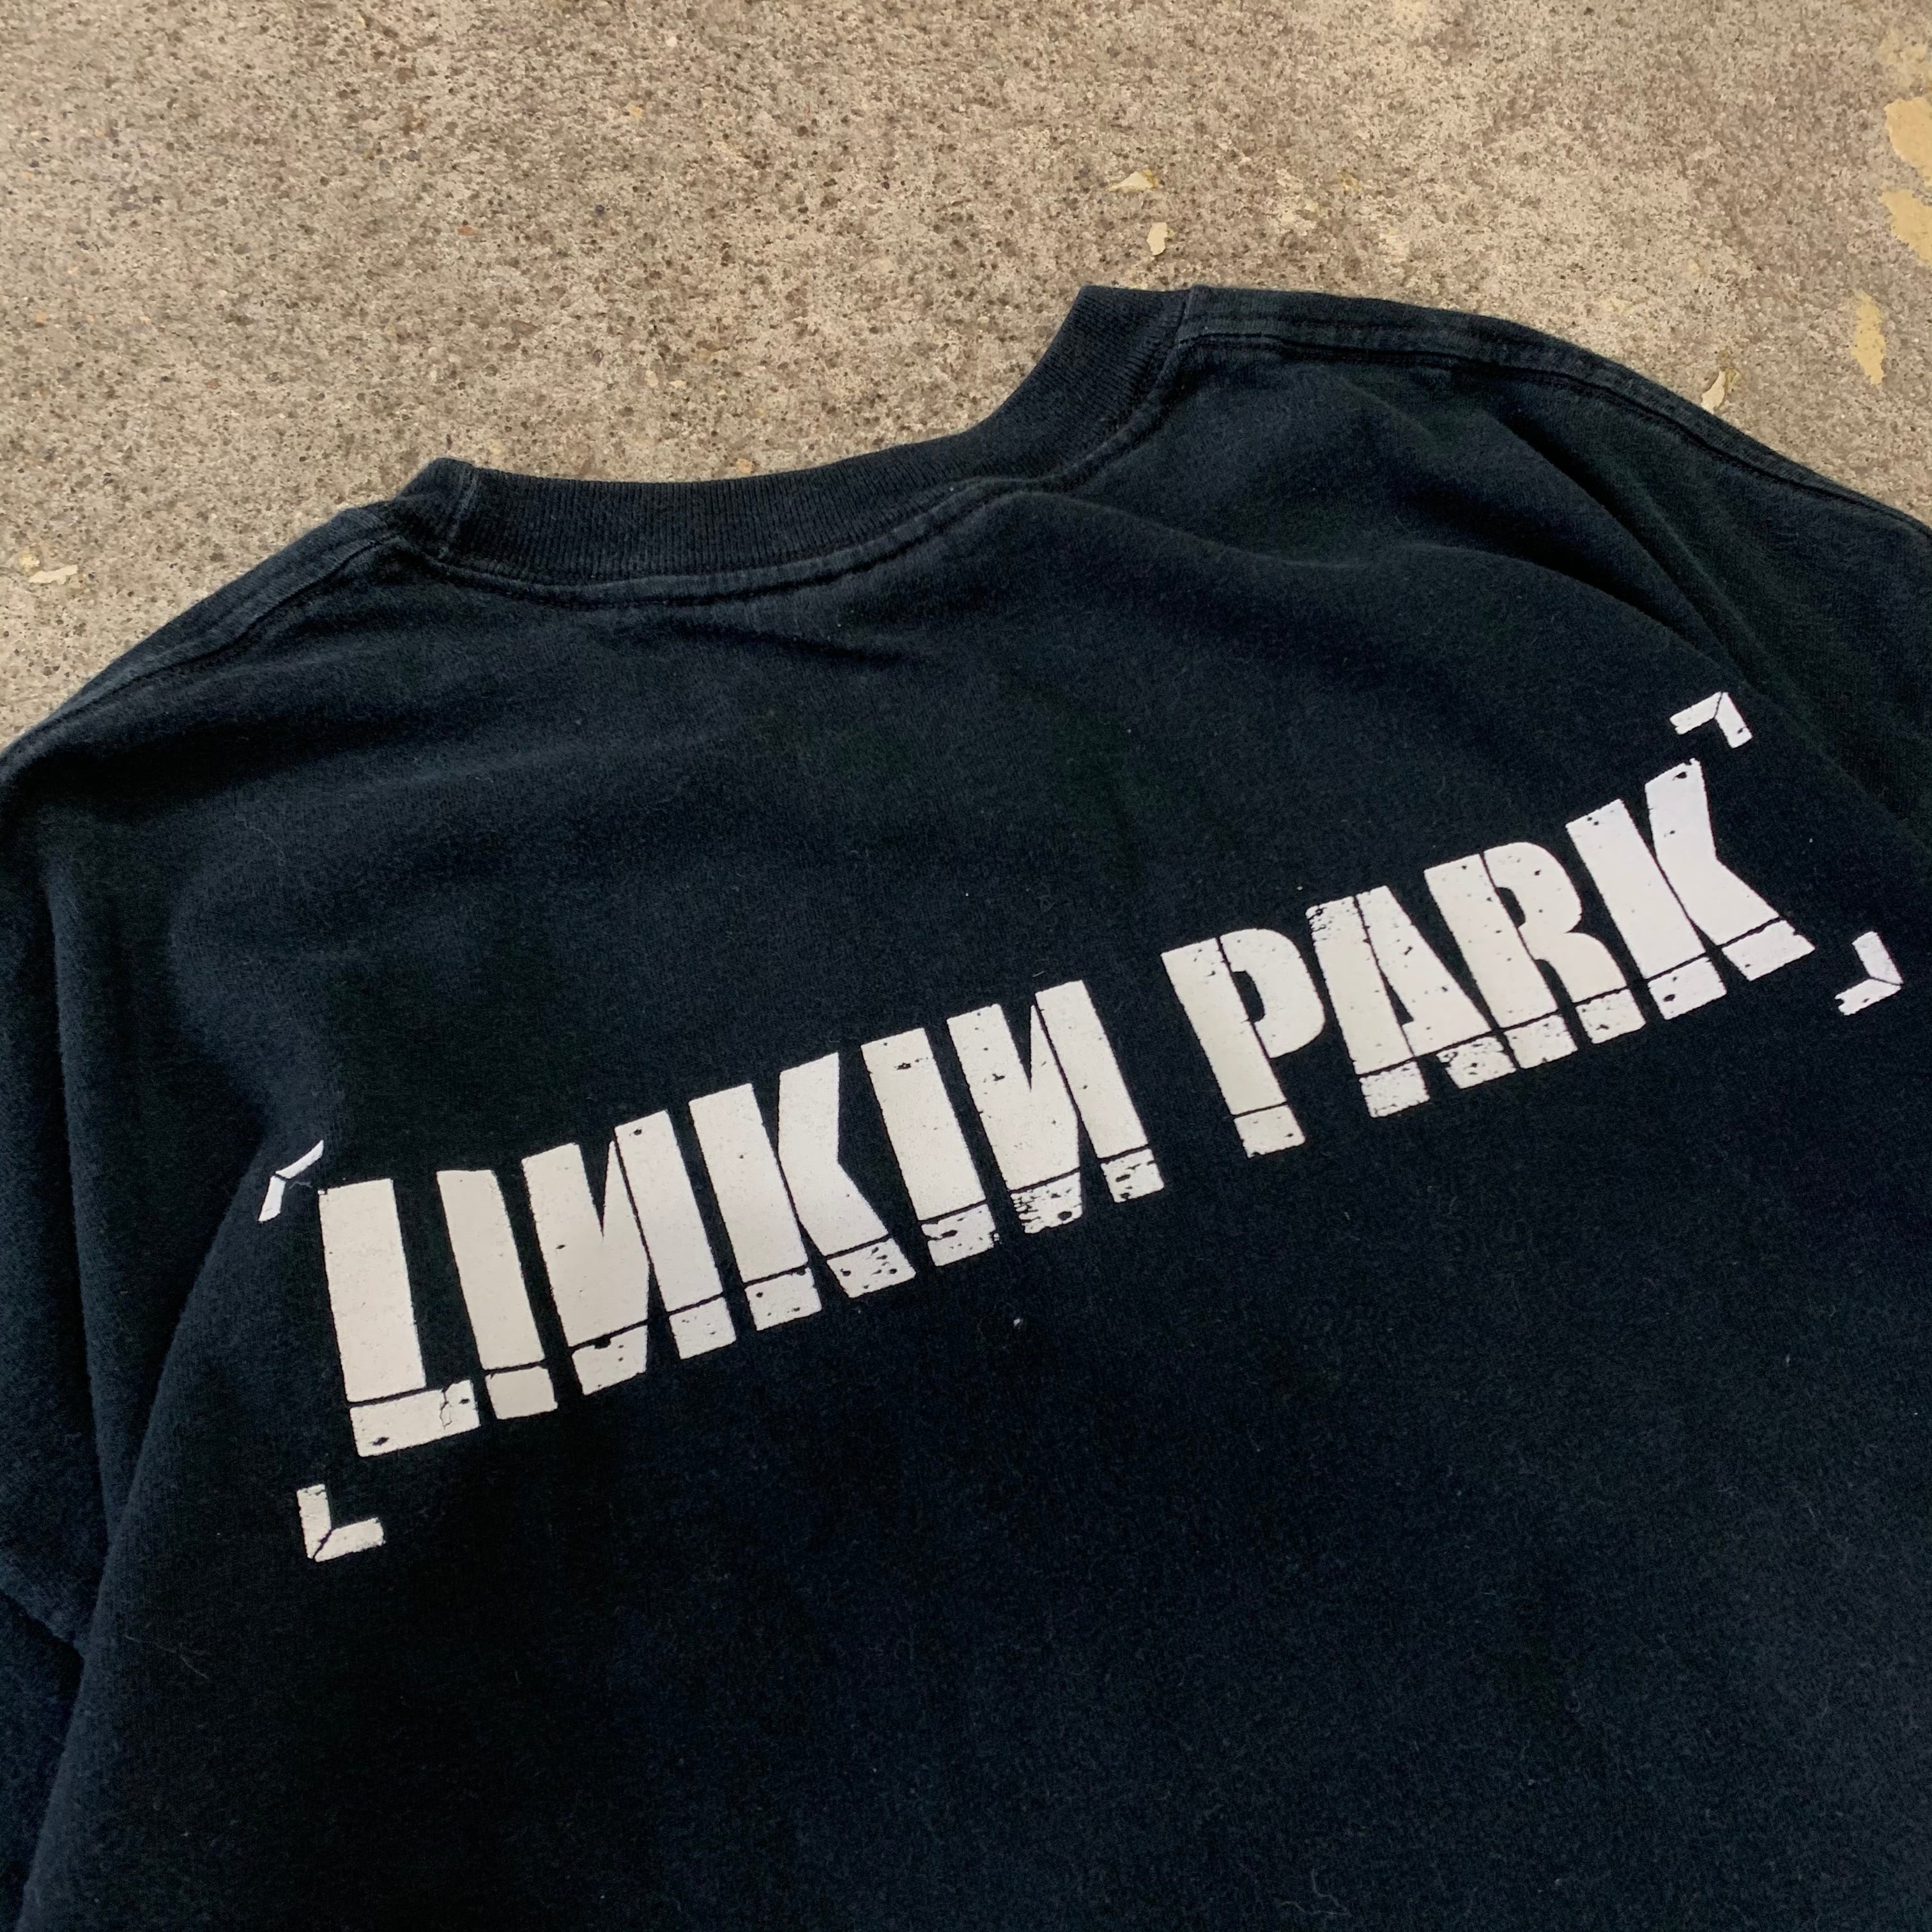 00s LINKIN PARK T-shirt | What'z up